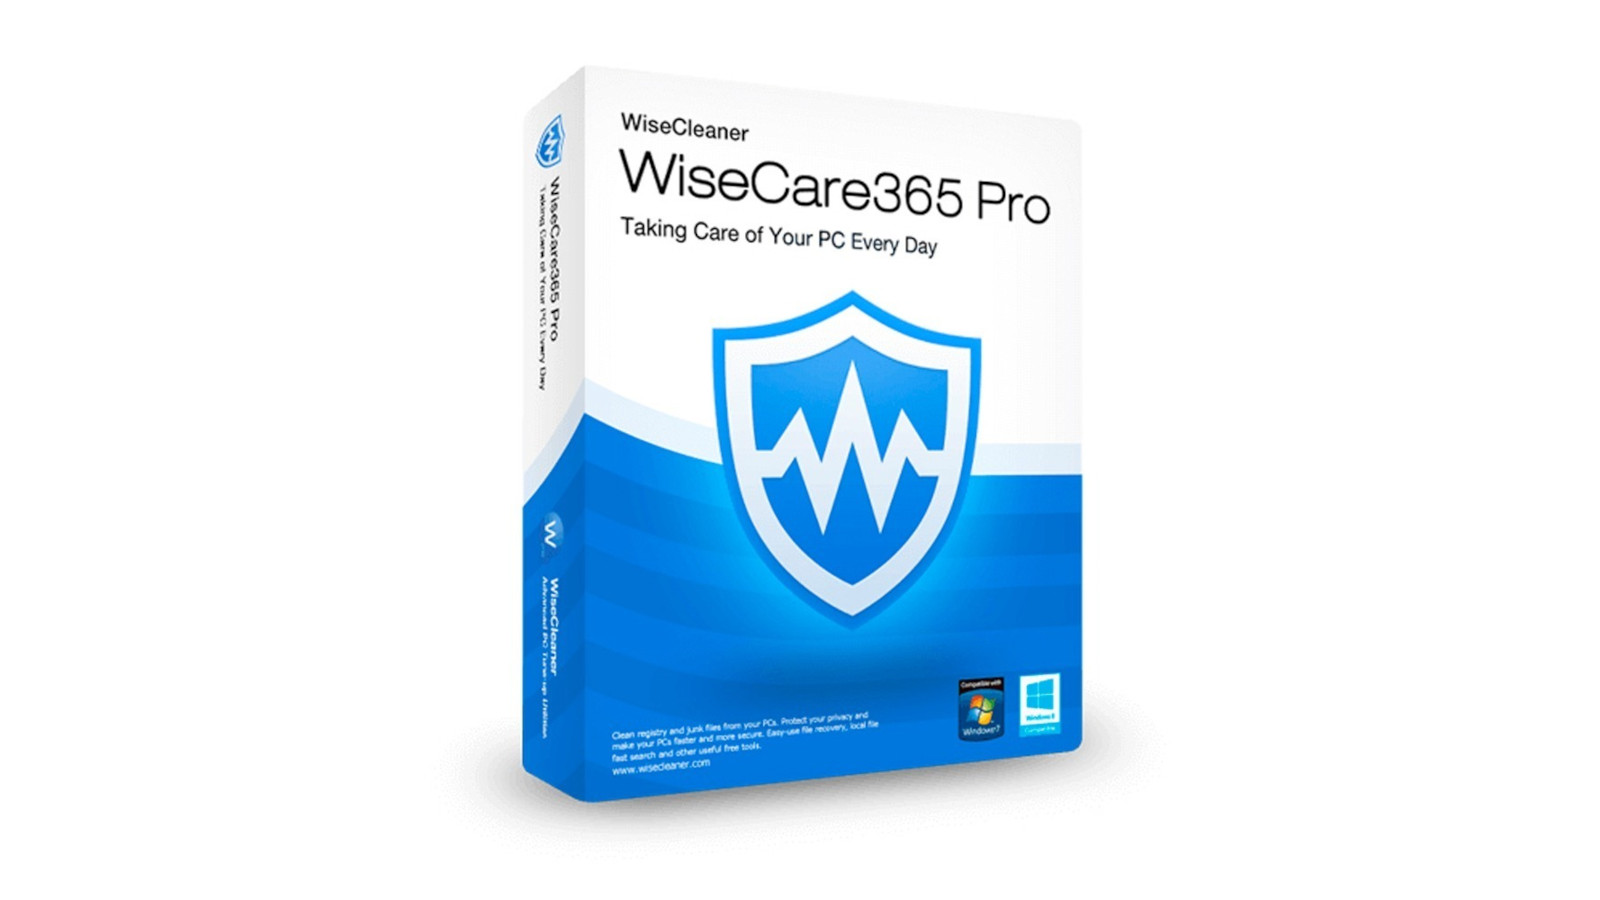 Wise Care 365 PRO CD Key (1 Year / 1 PC) 18.05$